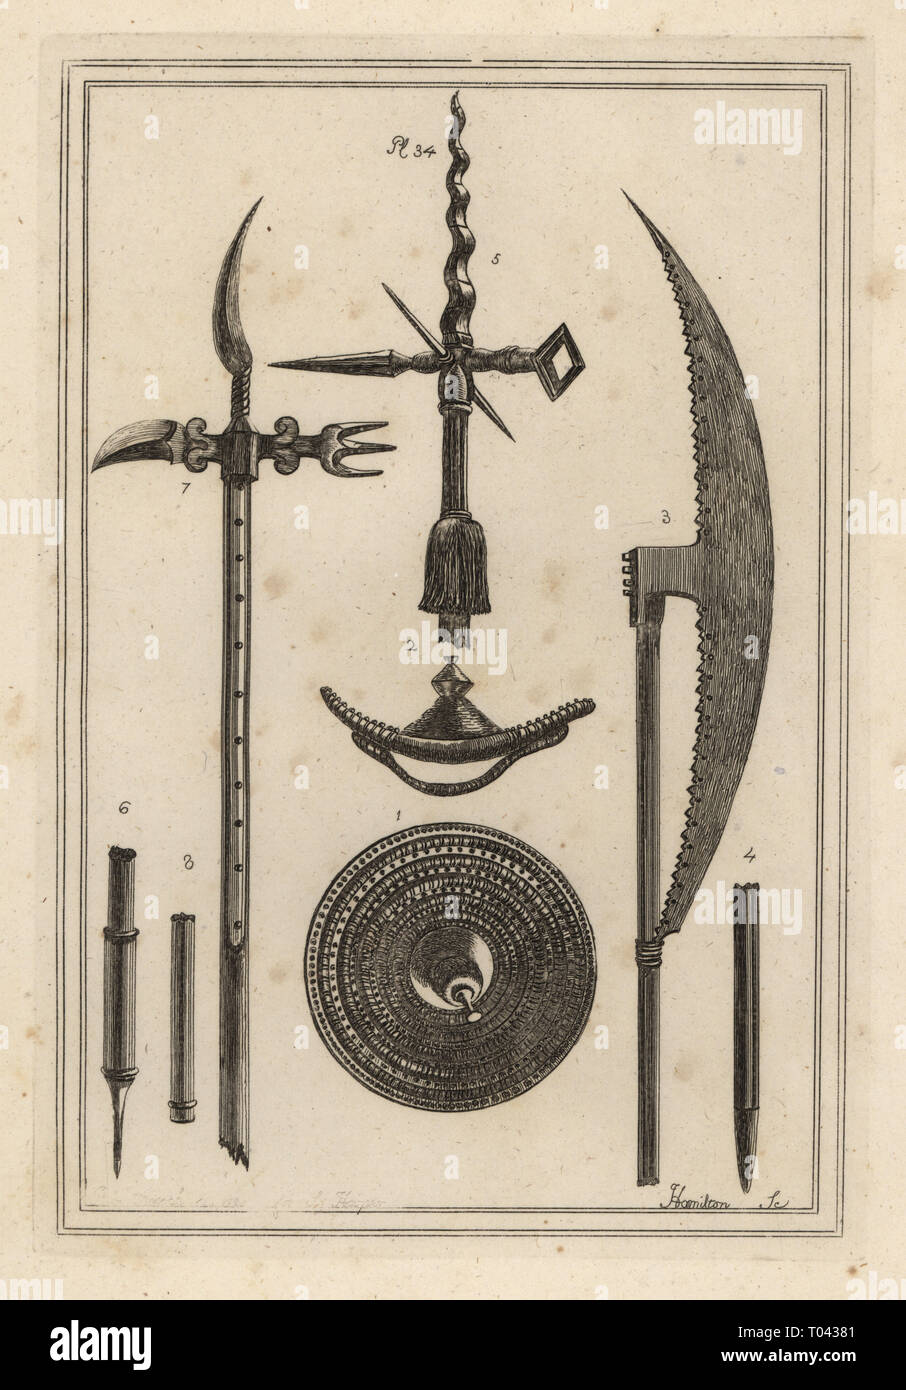 Concave roundel 1,2, battle axe 3,4, pole axe 5,6, and curious ancient weapon used by the English against the Scots 7,8. Copperplate engraving by J. Hamilton from Francis Grose's Military Antiquities respecting a History of the English Army, Stockdale, London, 1812. Stock Photo